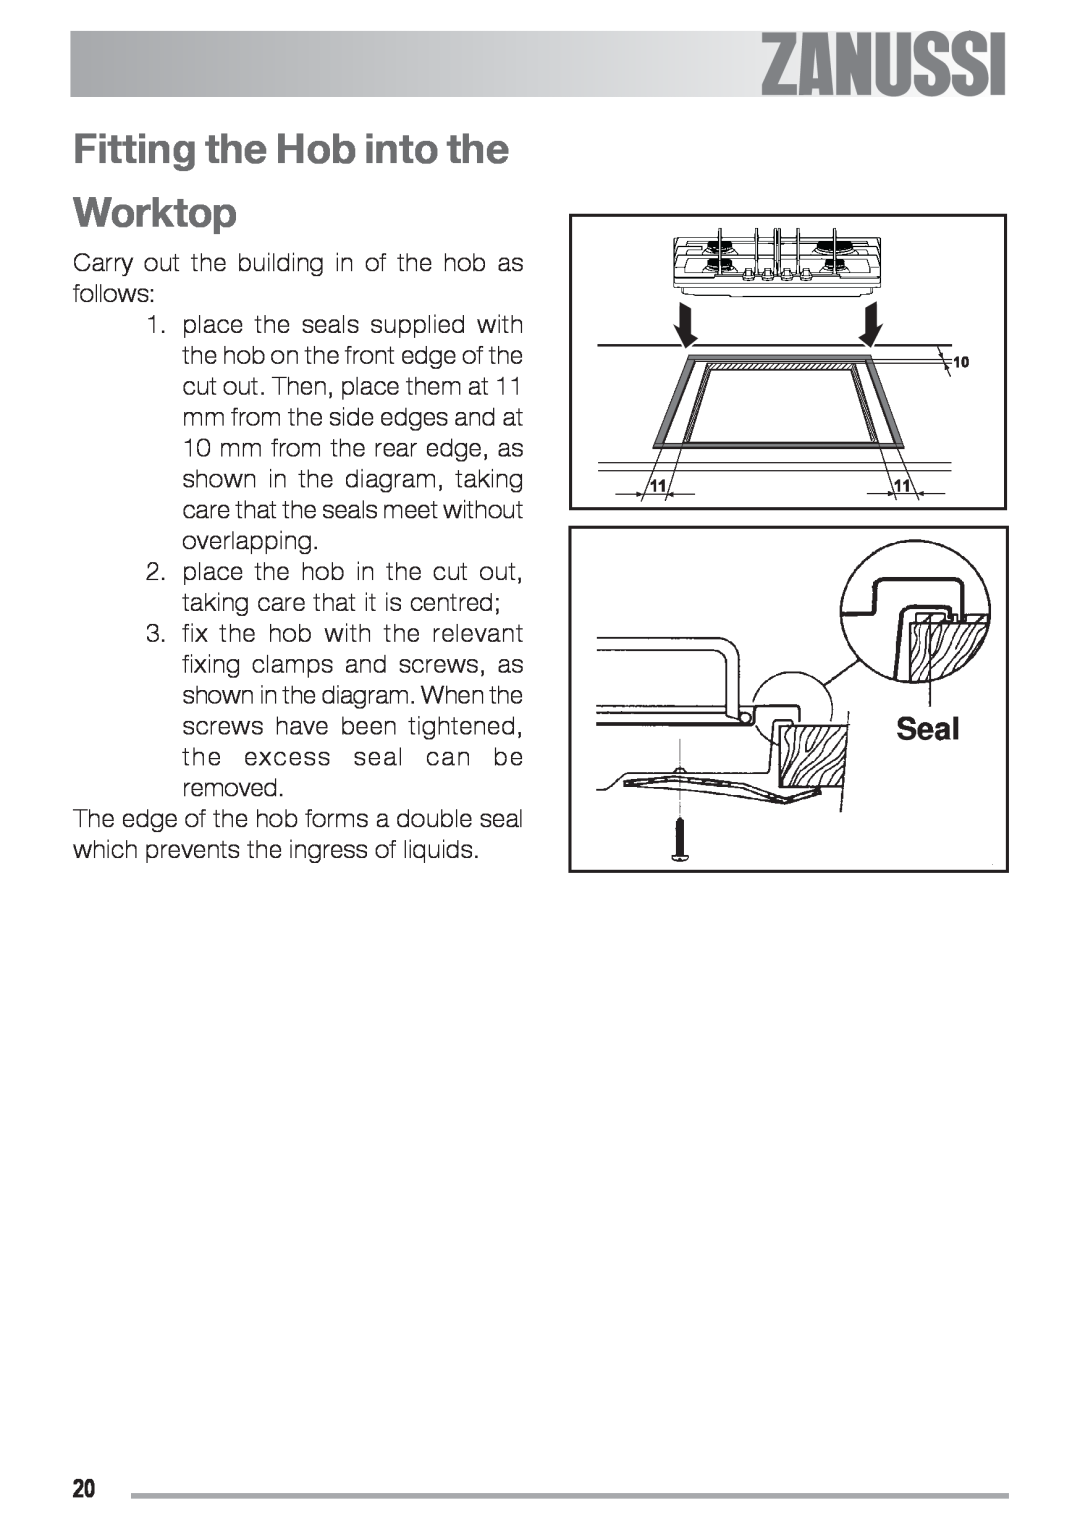 Zanussi ZGS 682 ICT manual Fitting the Hob into the Worktop, Seal 